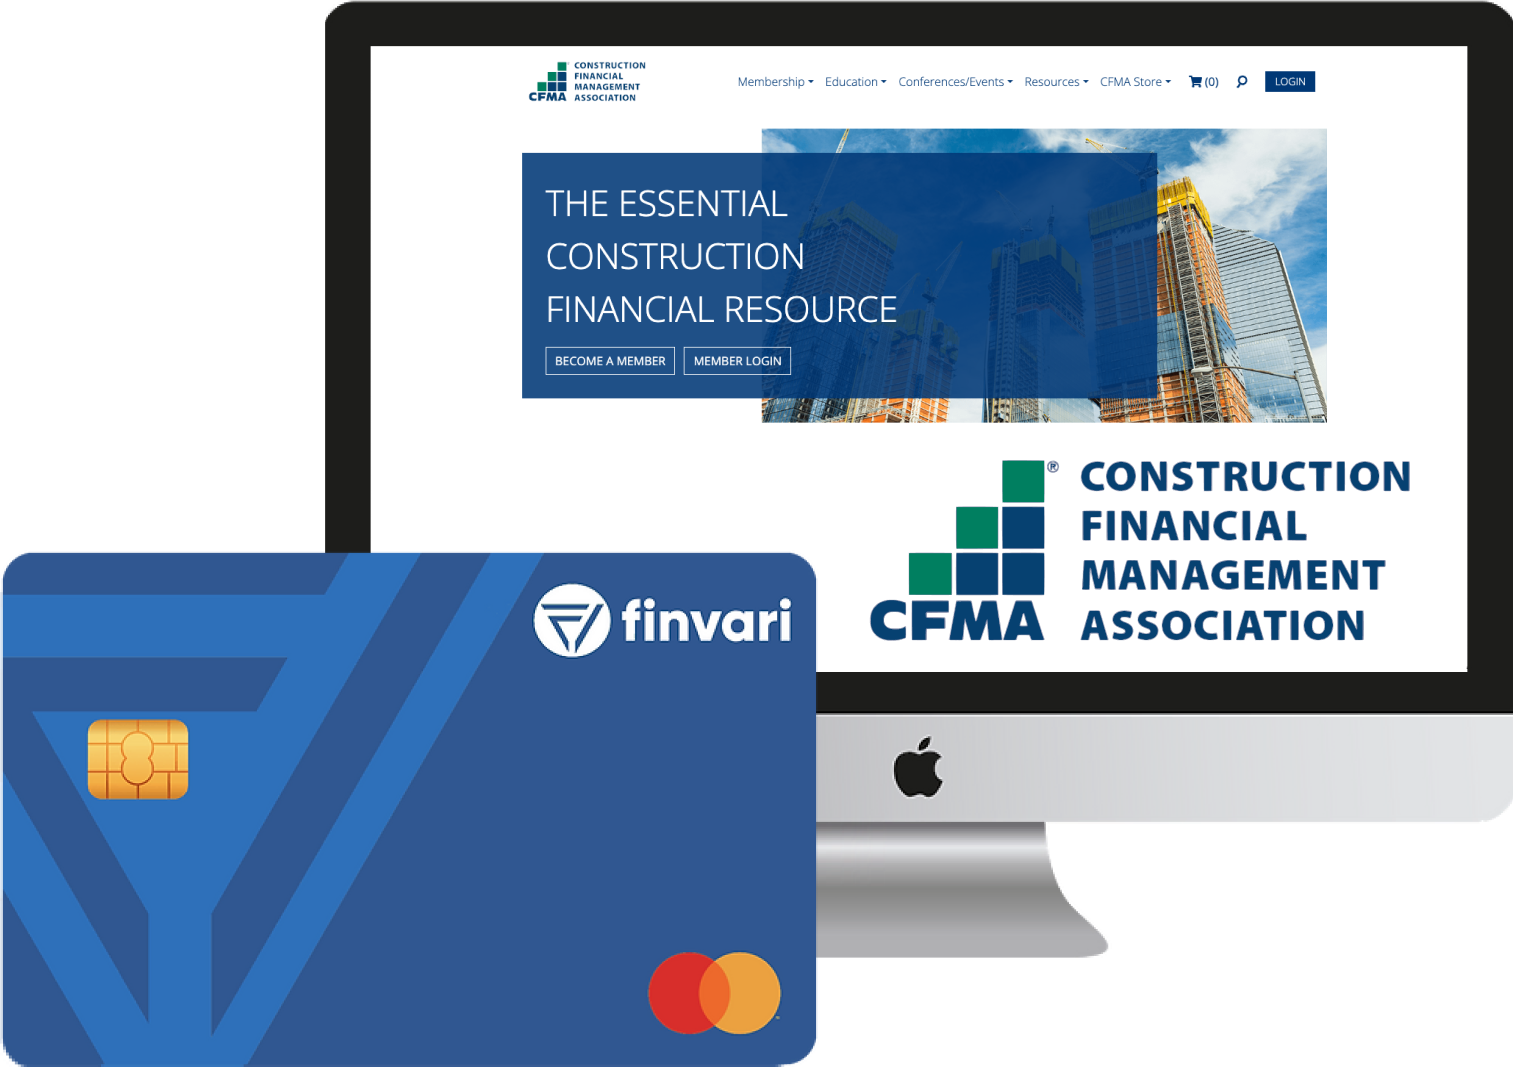 A Mac computer screen showing the CFMA website interface, overlaid by a blue Finvari debit card with a gold chip and Finvari logos.